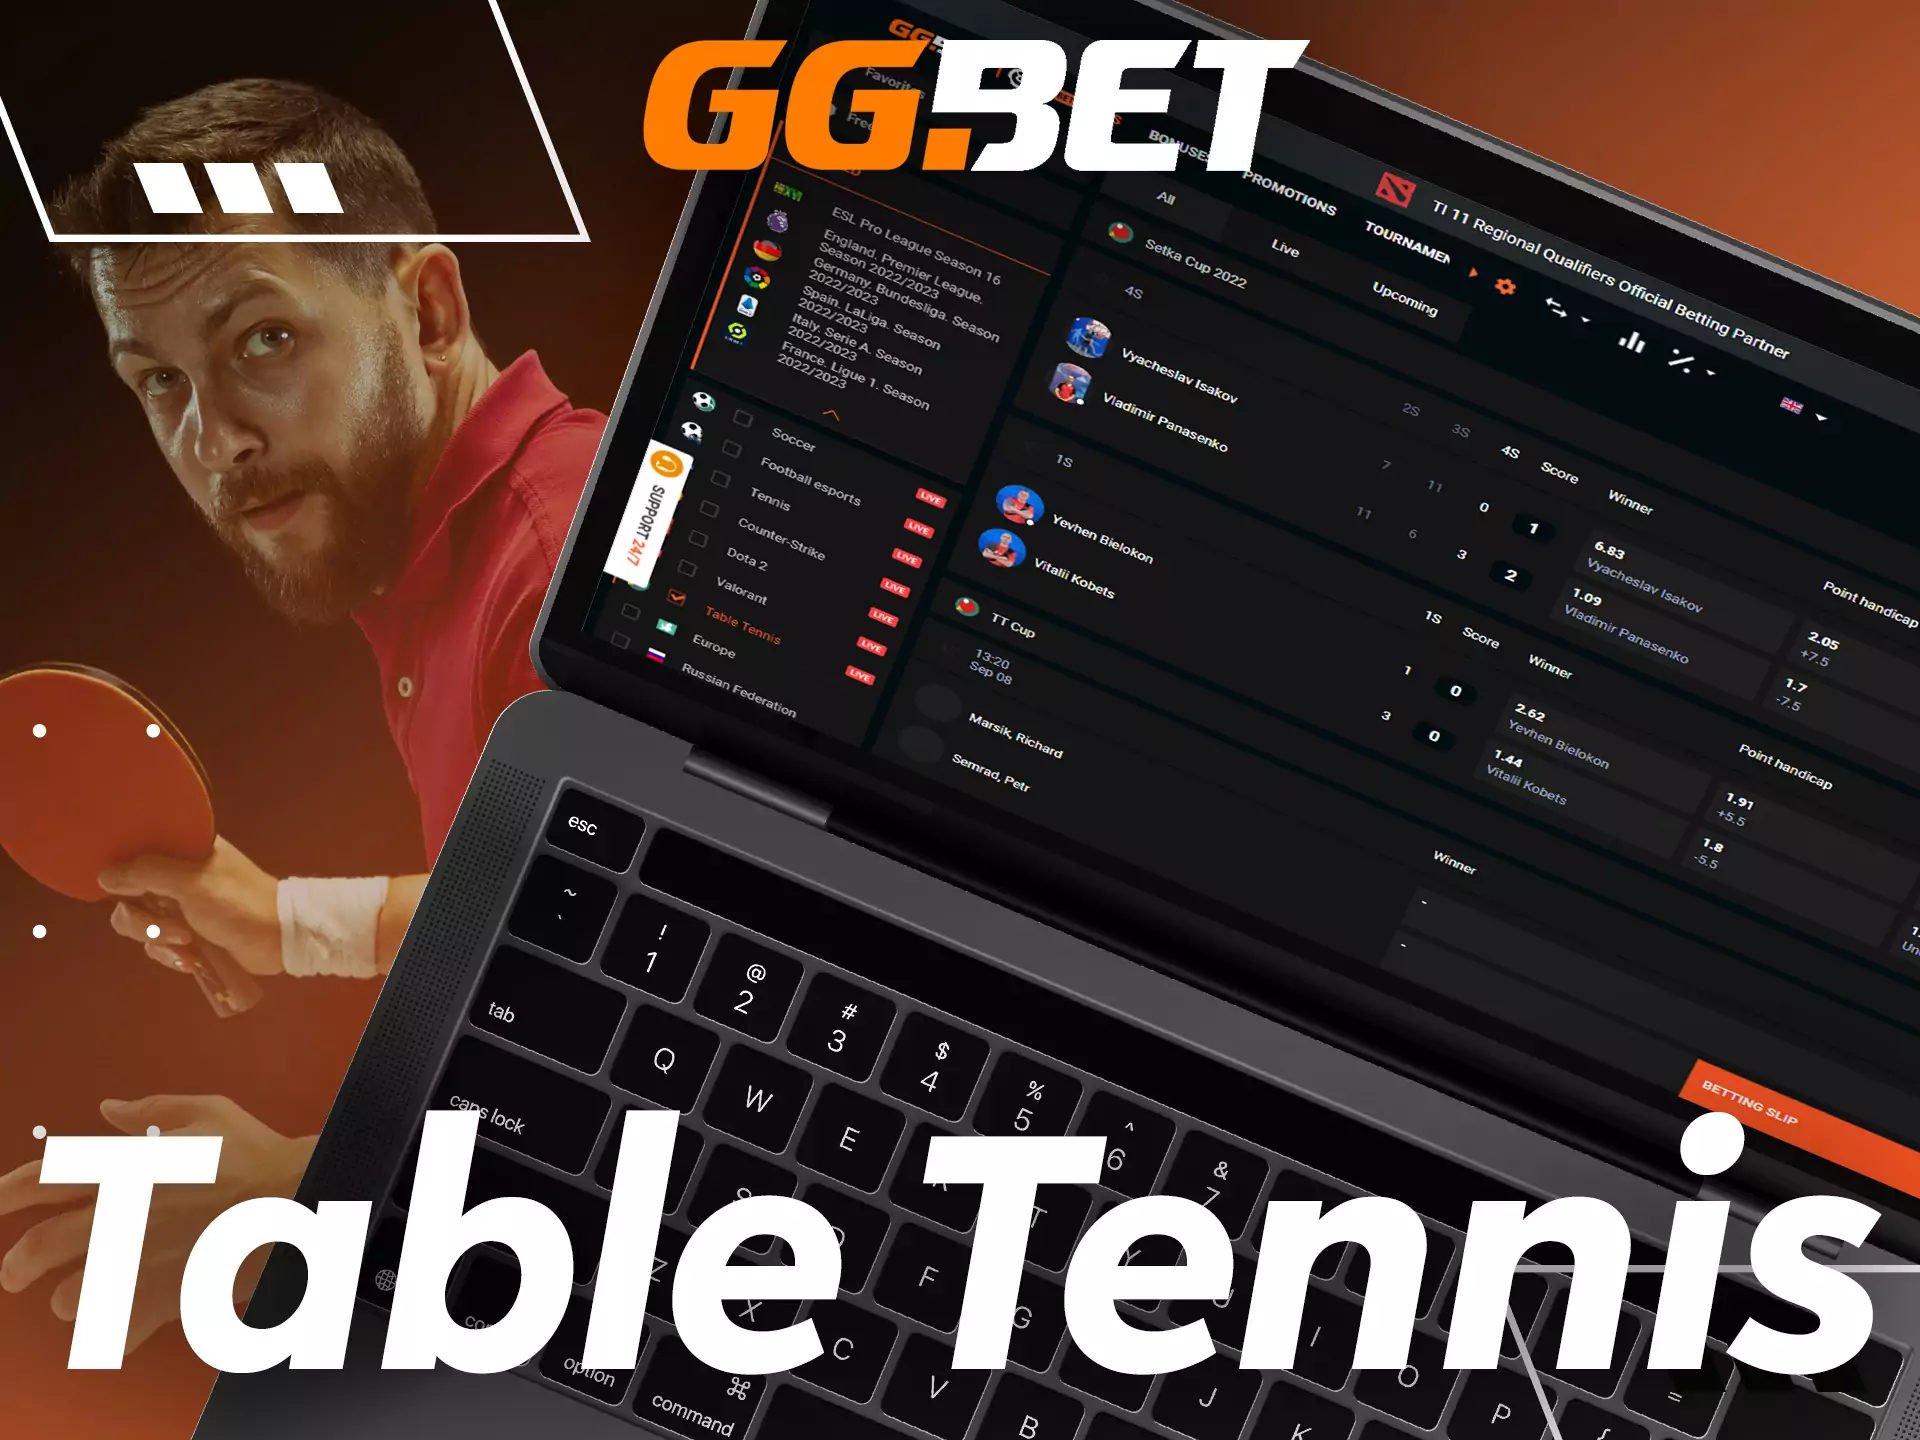 You can place bets on table tennis at GGBet.